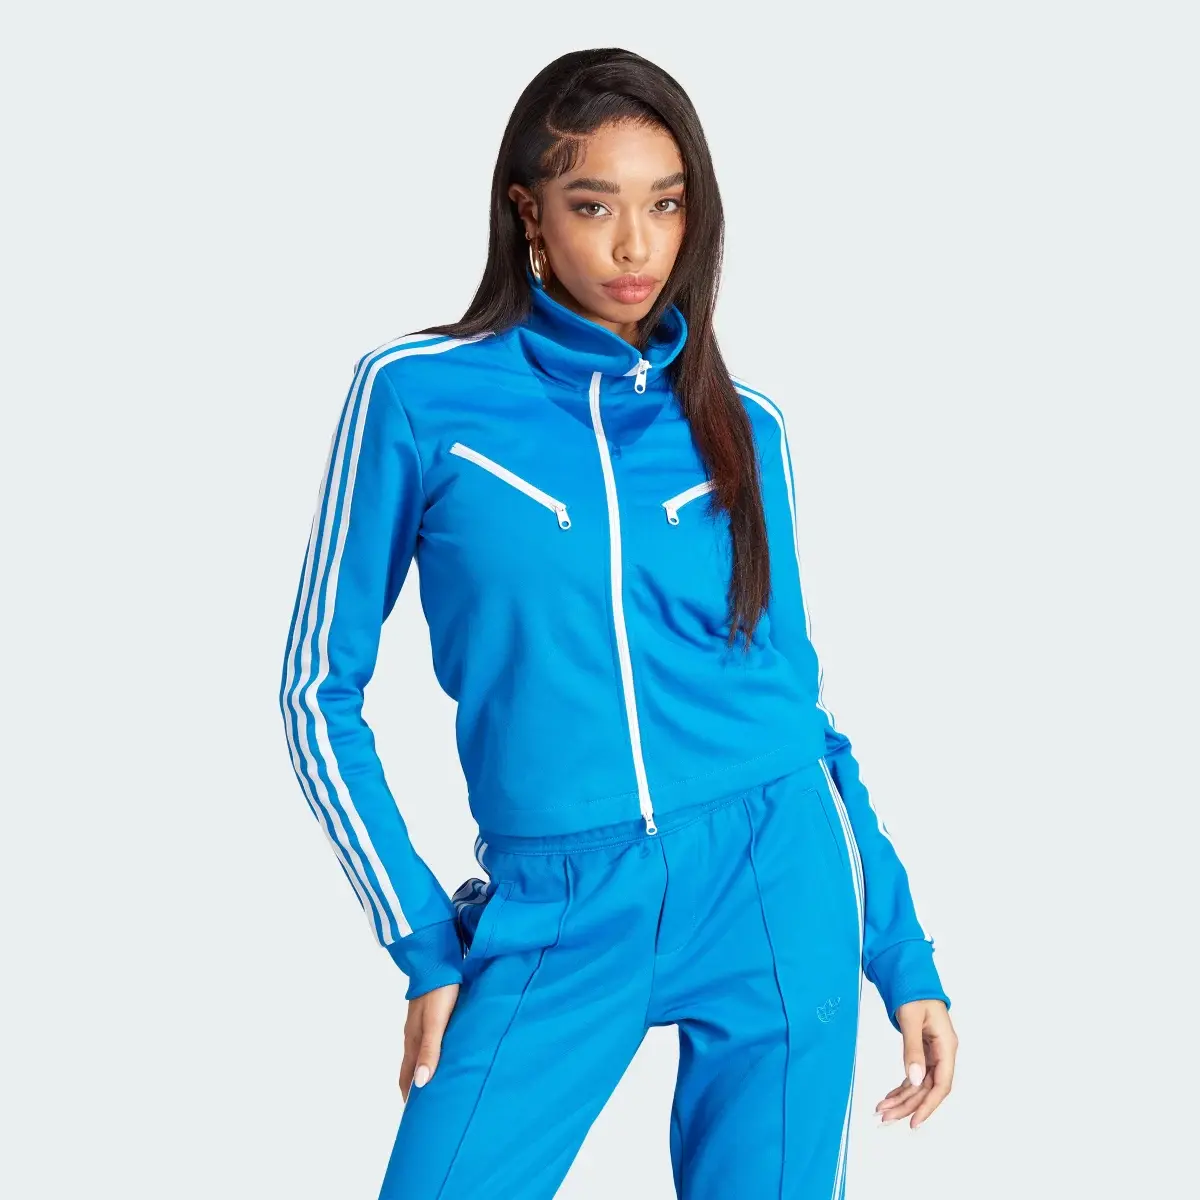 Adidas Track top Blue Version Montreal. 2